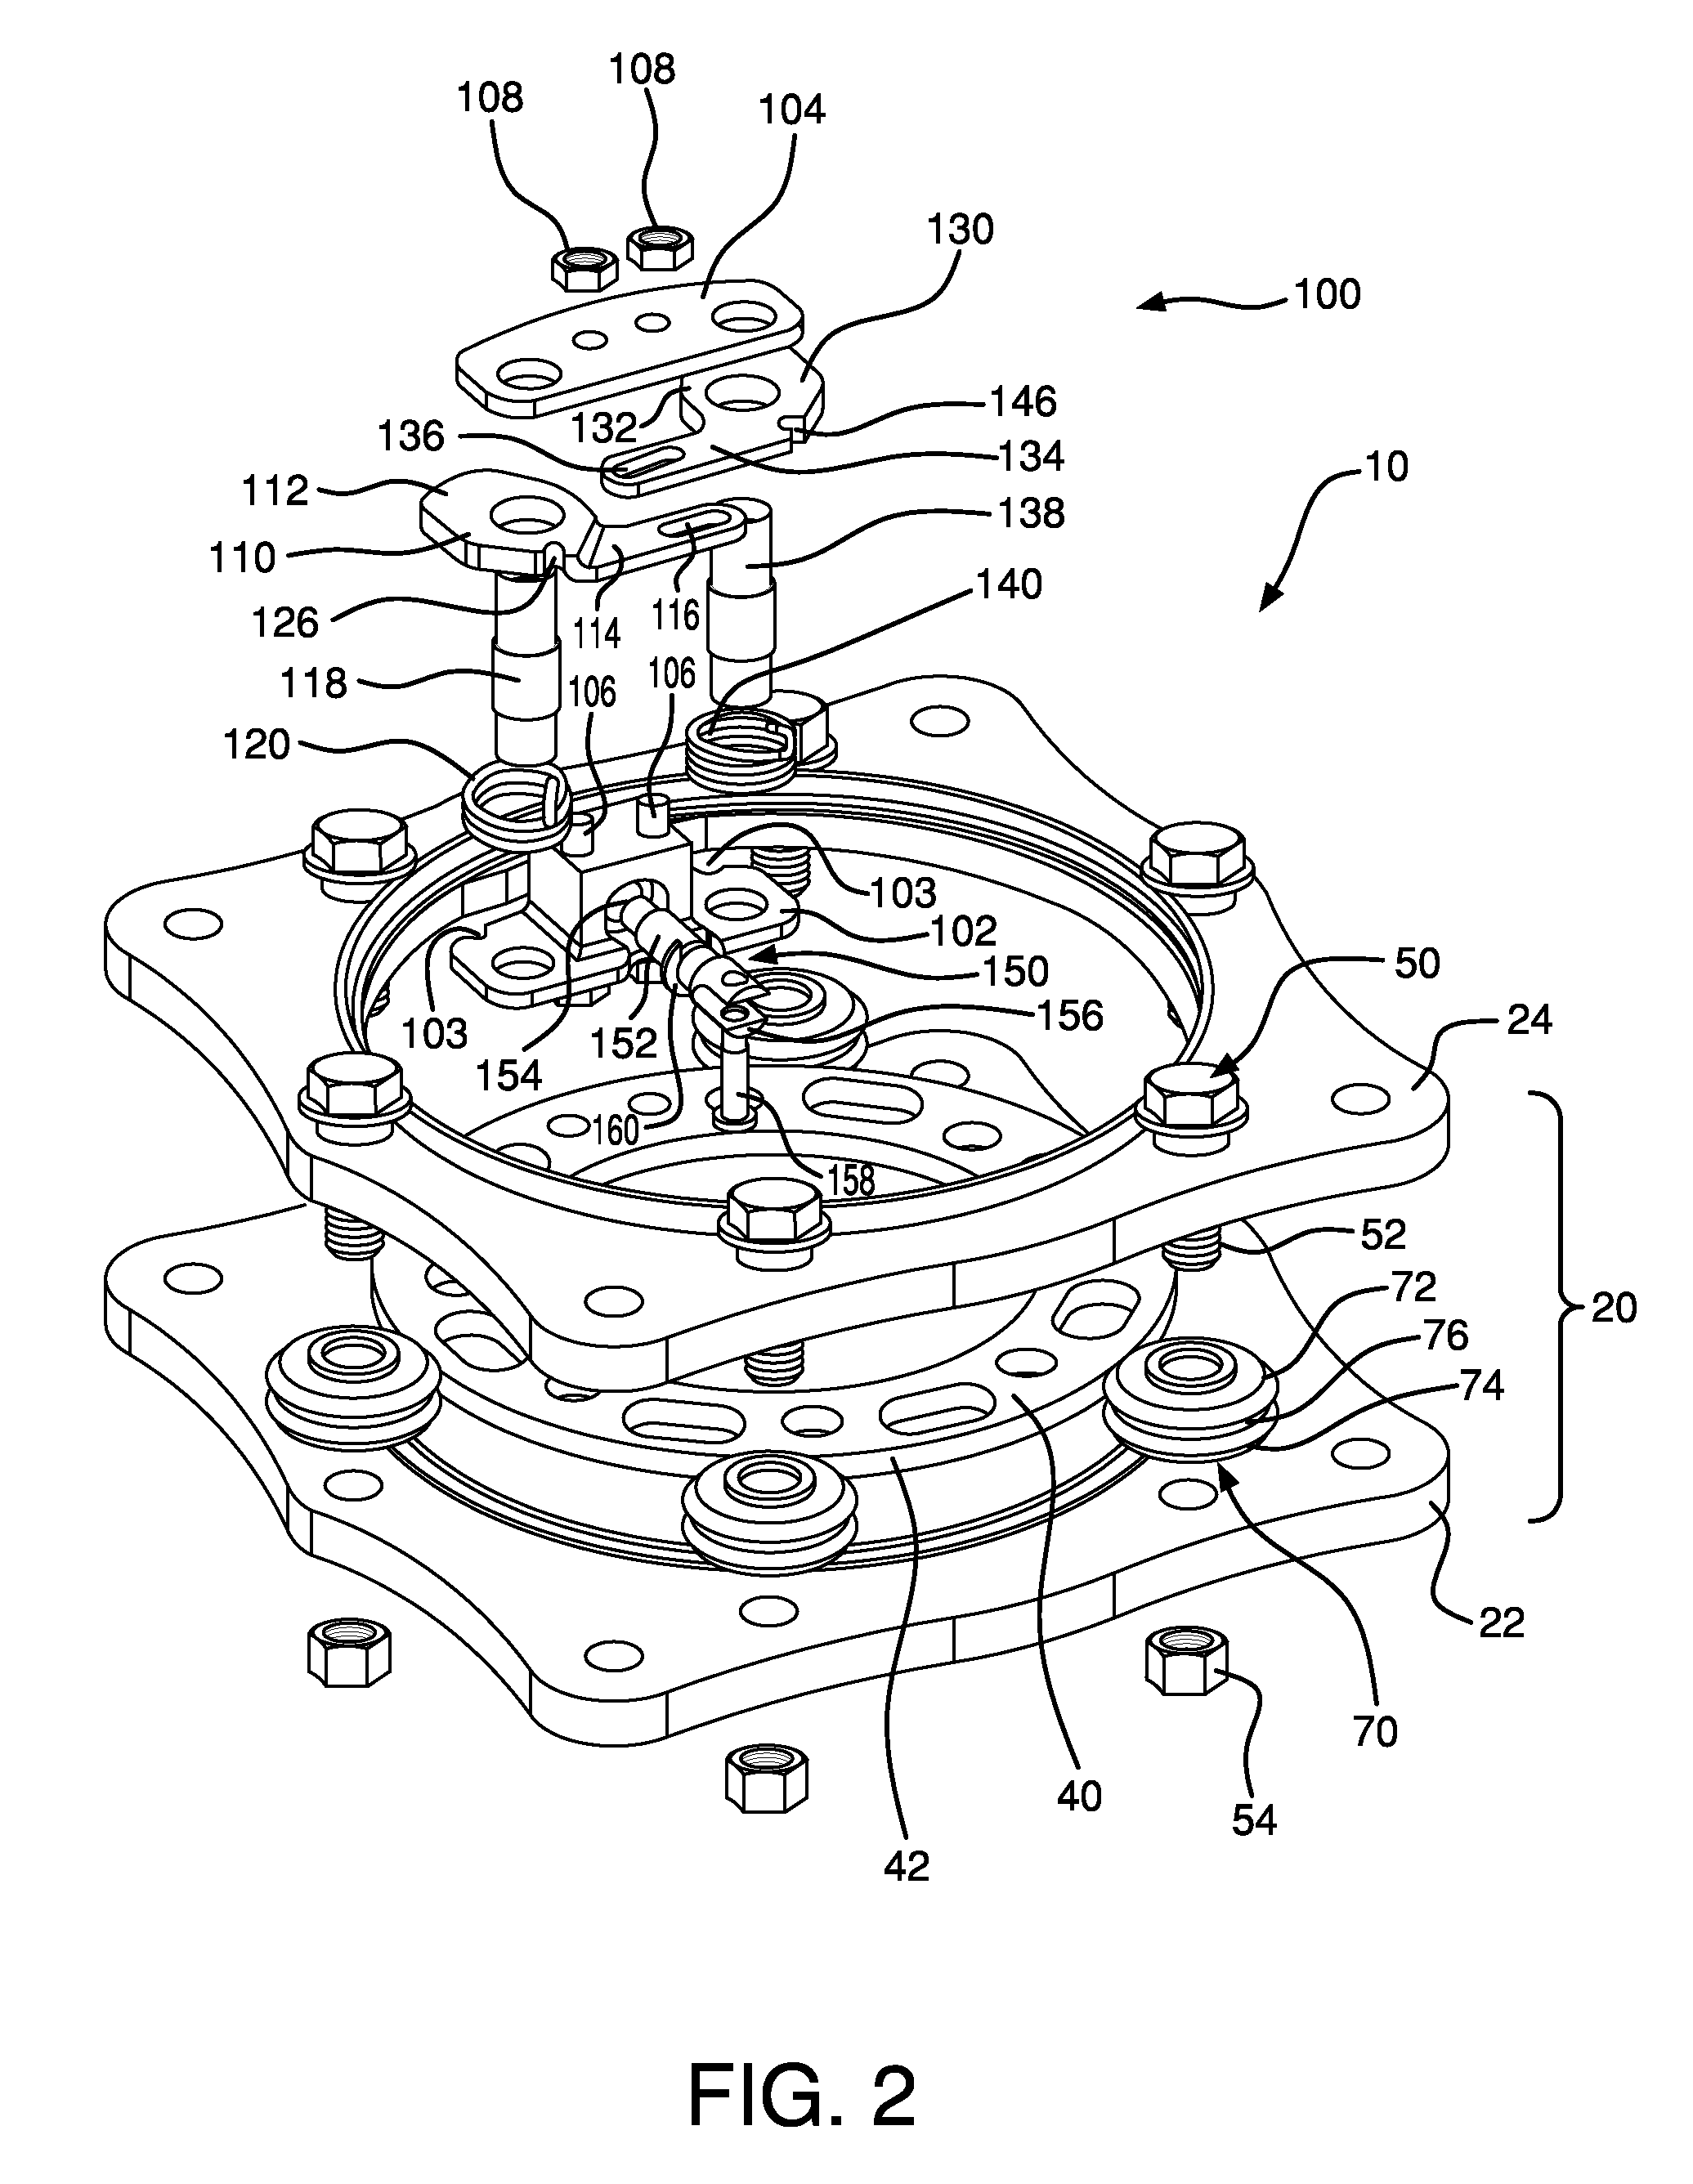 Seat swivel with brake for infinite rotational position adjustment